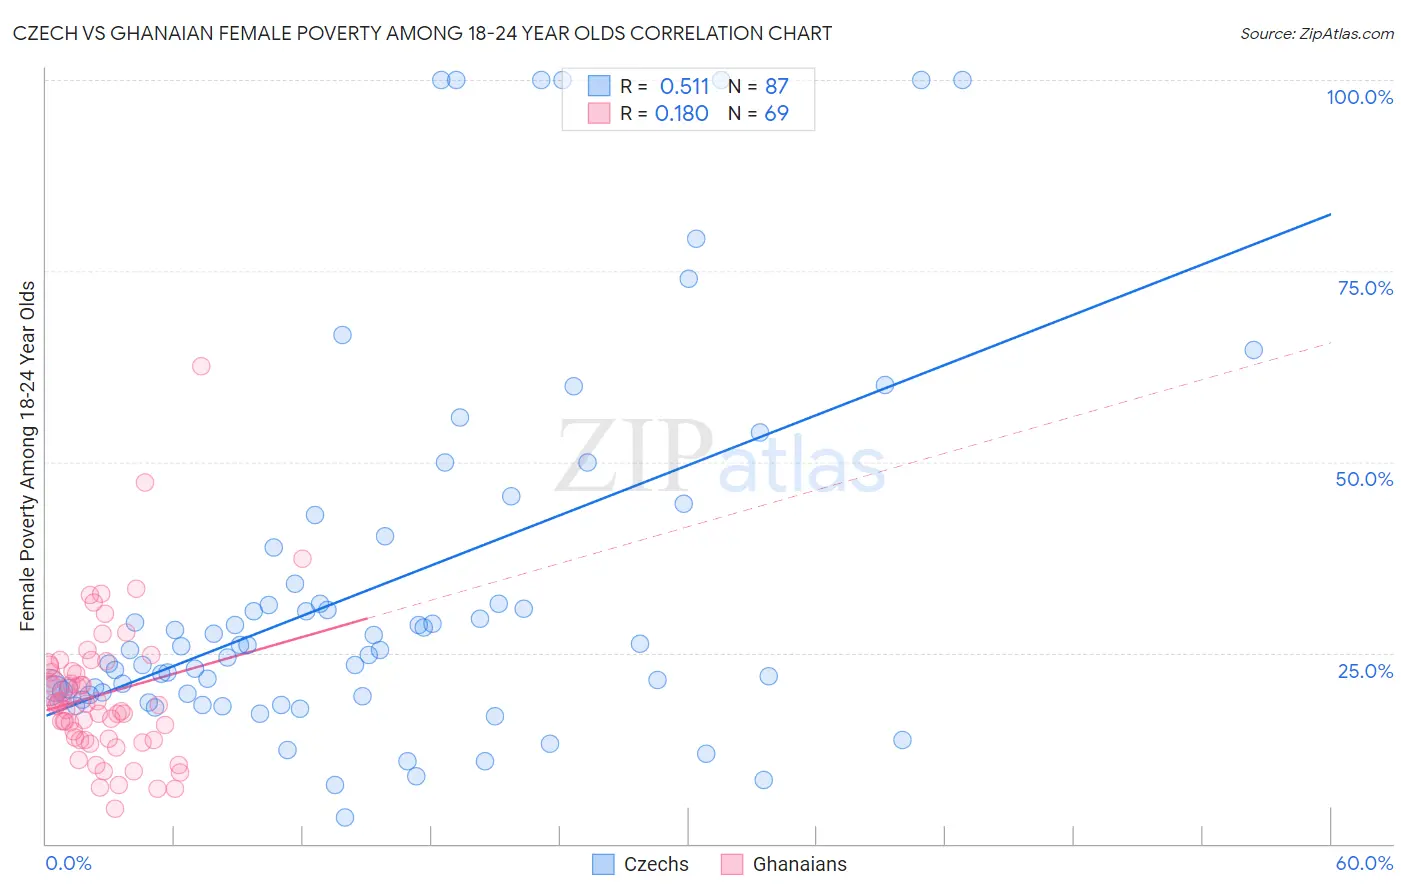 Czech vs Ghanaian Female Poverty Among 18-24 Year Olds